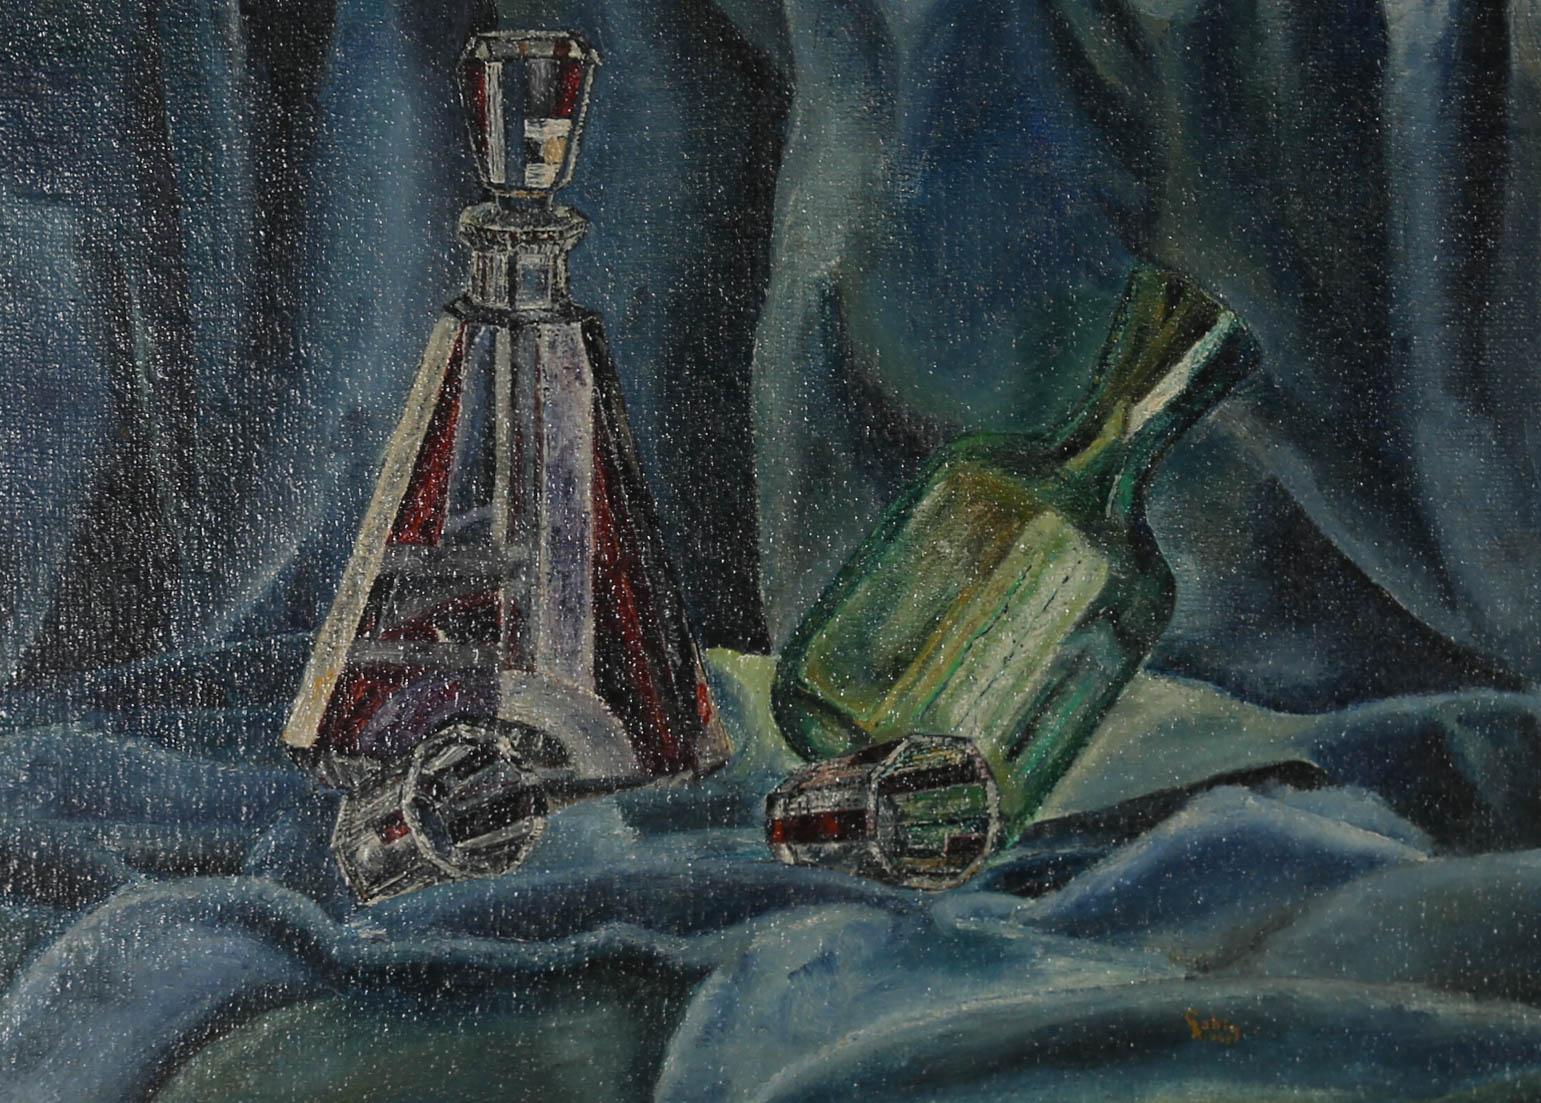 This precisely painted still life depicts two art deco decanters, glinting in the soft folds of a dark satin cloth. Captured next to the moulded vessels are two crystal shot glasses, cut in a classy octagon style. The painting has been signed and